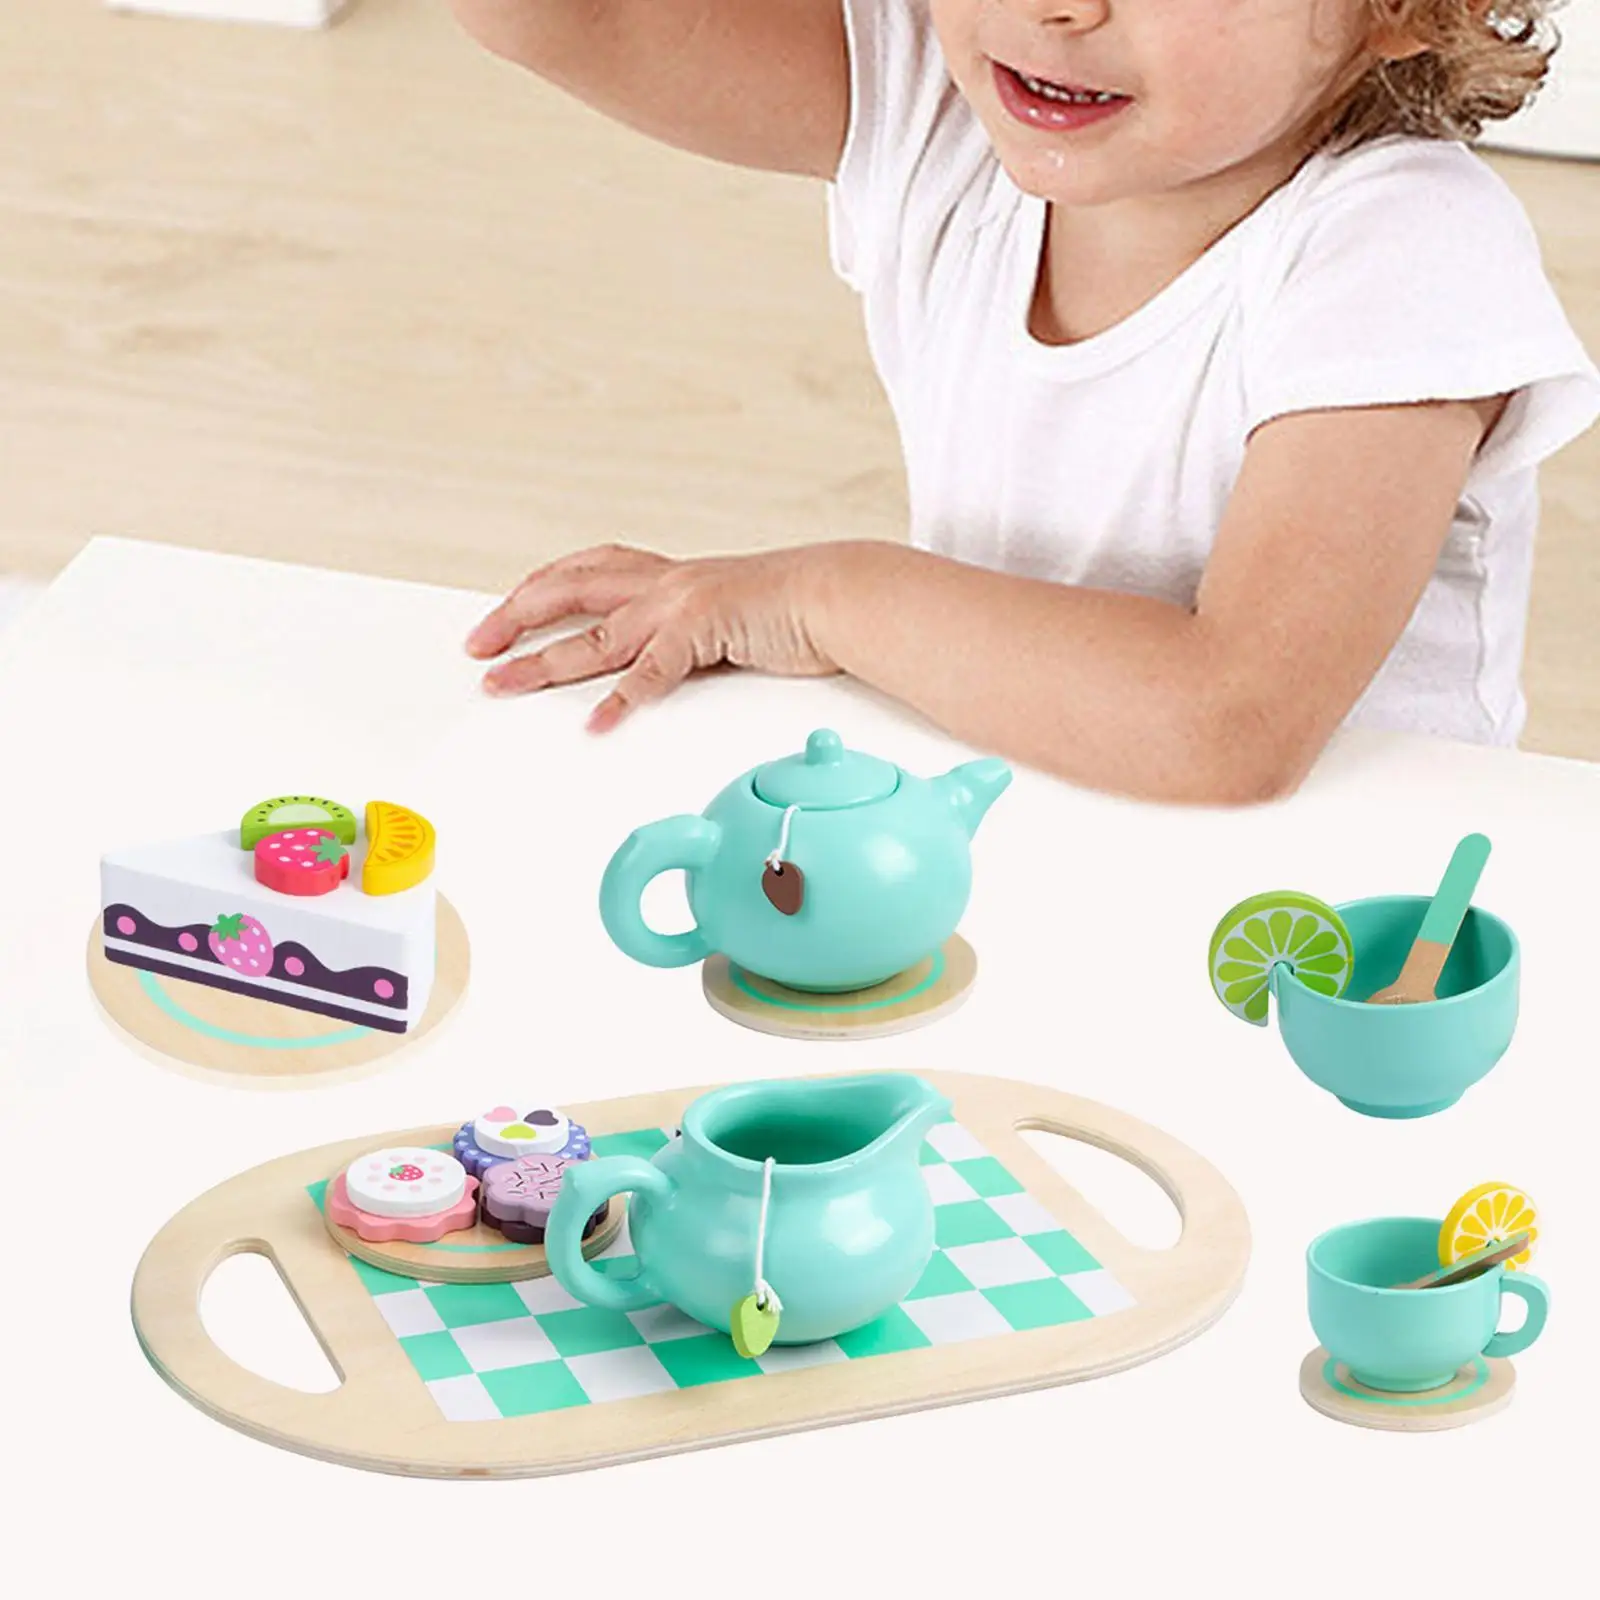 

Kids Tea Party with Teapot, Coaster, Coffee Mugs, Spoons, Saucers, and Serving Tray Montessori Toy for Little Girls Children